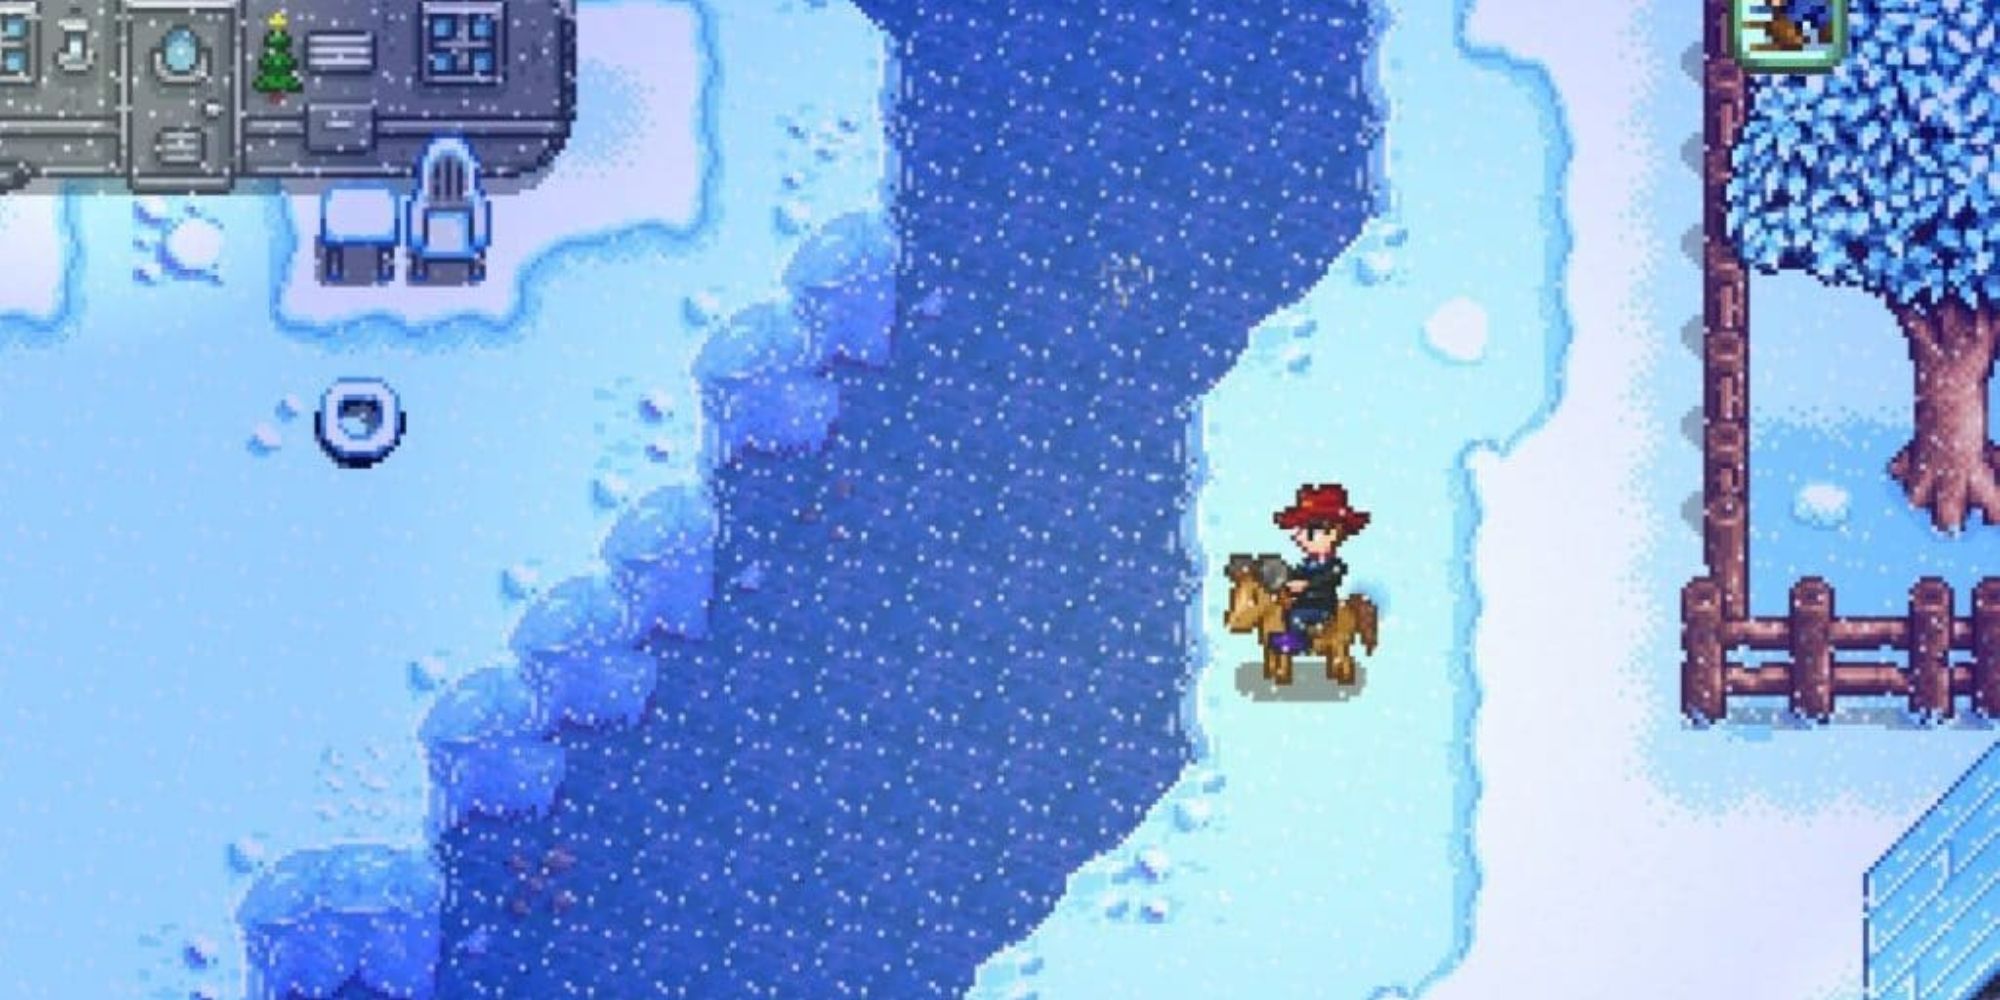 Stardew Valley character on a horse in front of the Town River during winter